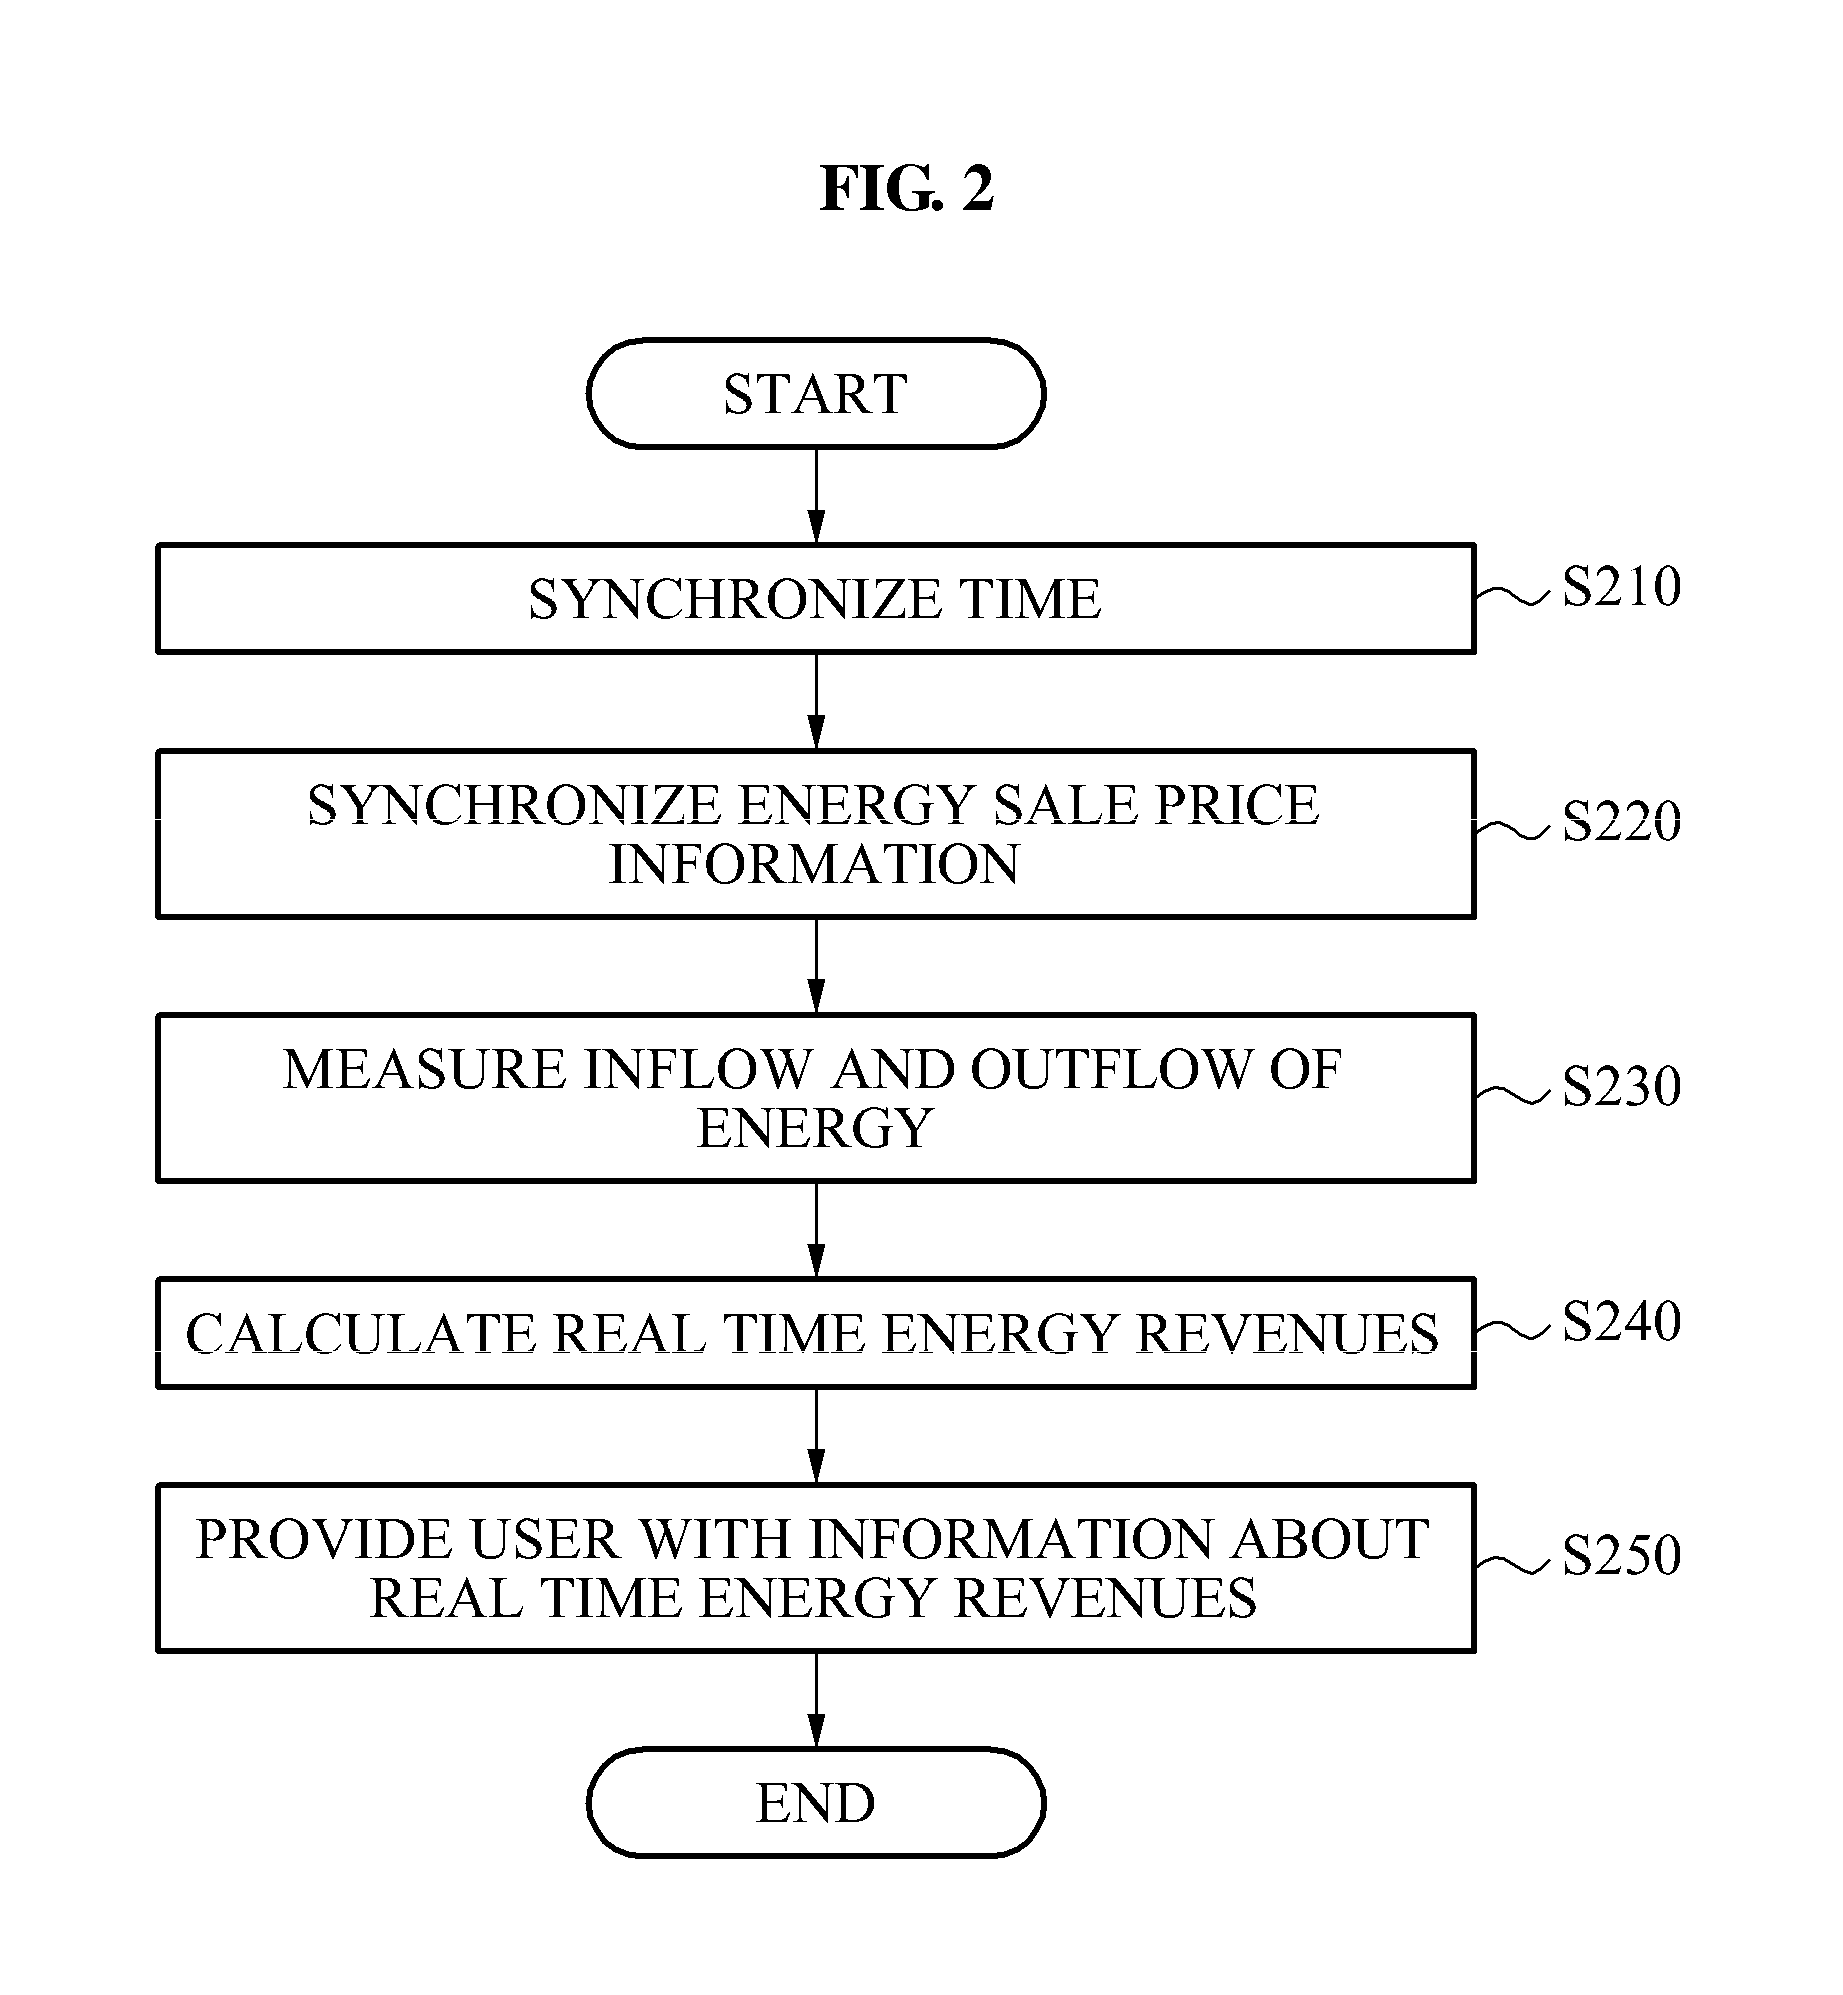 Method and apparatus for calculating energy revenues of electric power devices based on real time pricing